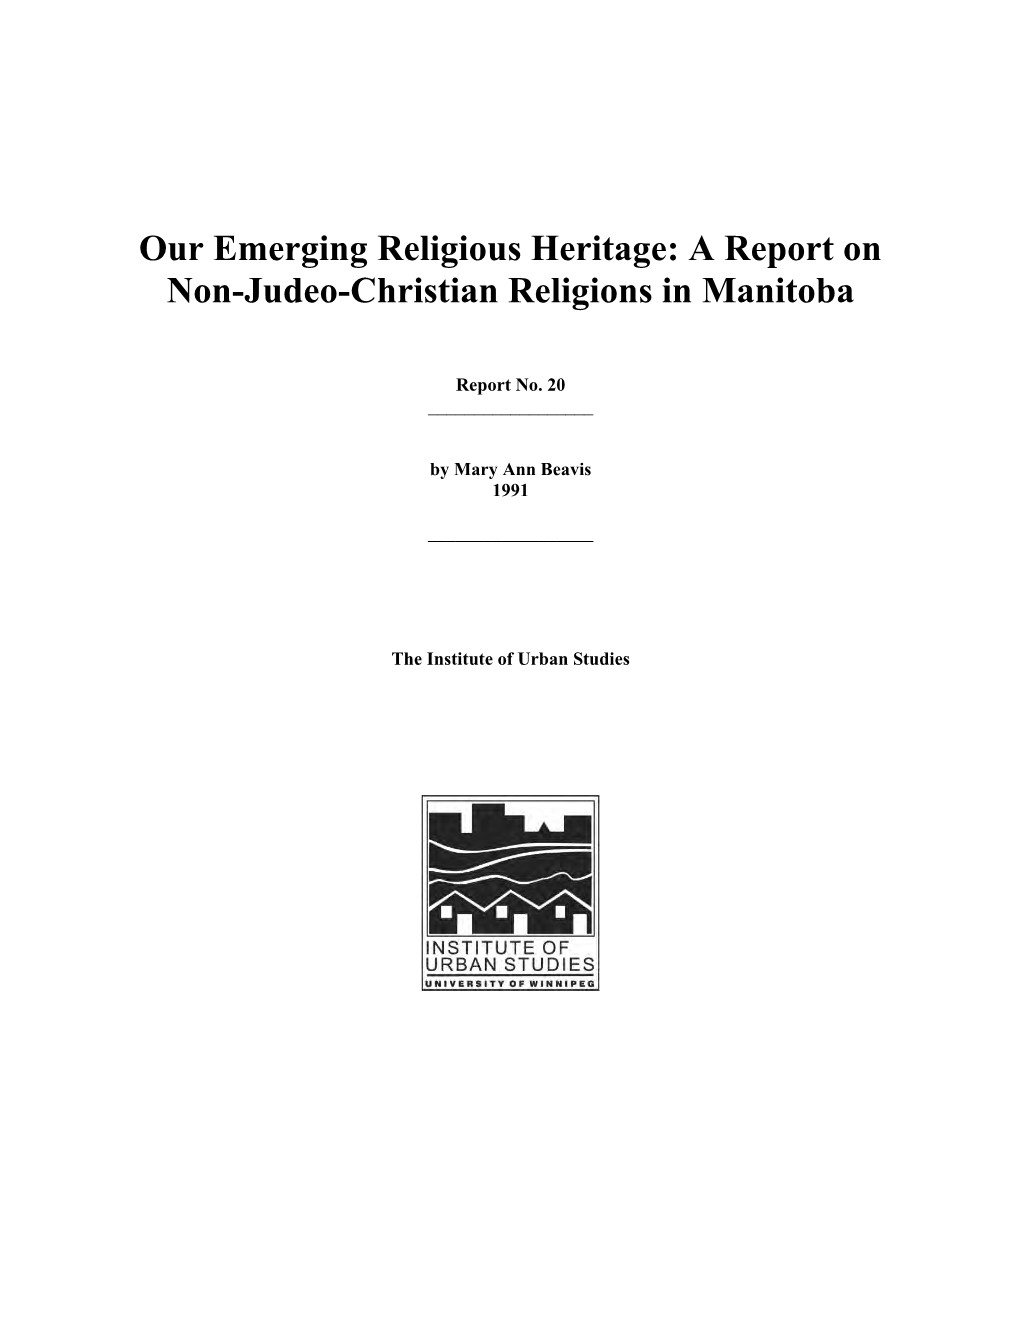 Our Emerging Religious Heritage: a Report on Non-Judeo-Christian Religions in Manitoba